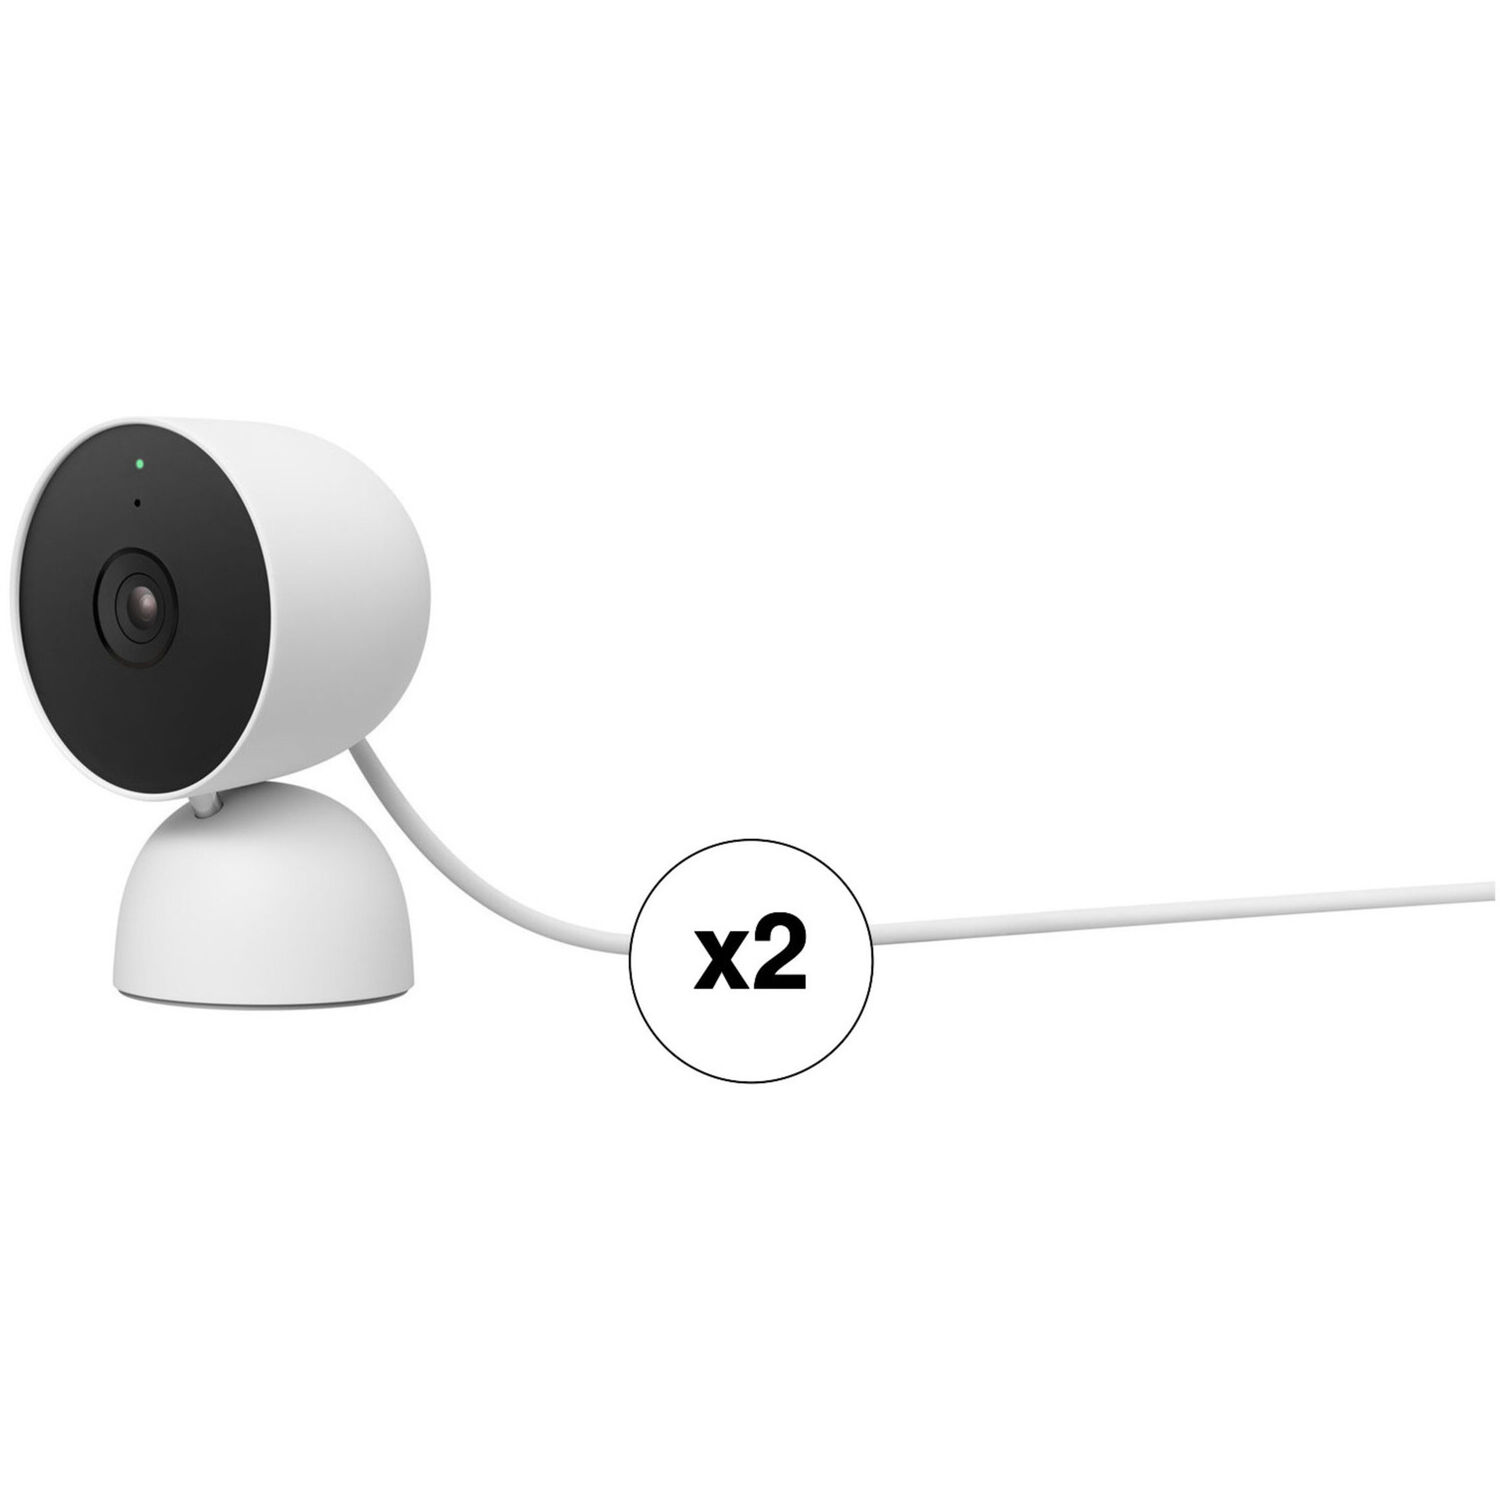 Google 1080p Nest Cam Wired (Snow, 2-Pack) $143.98